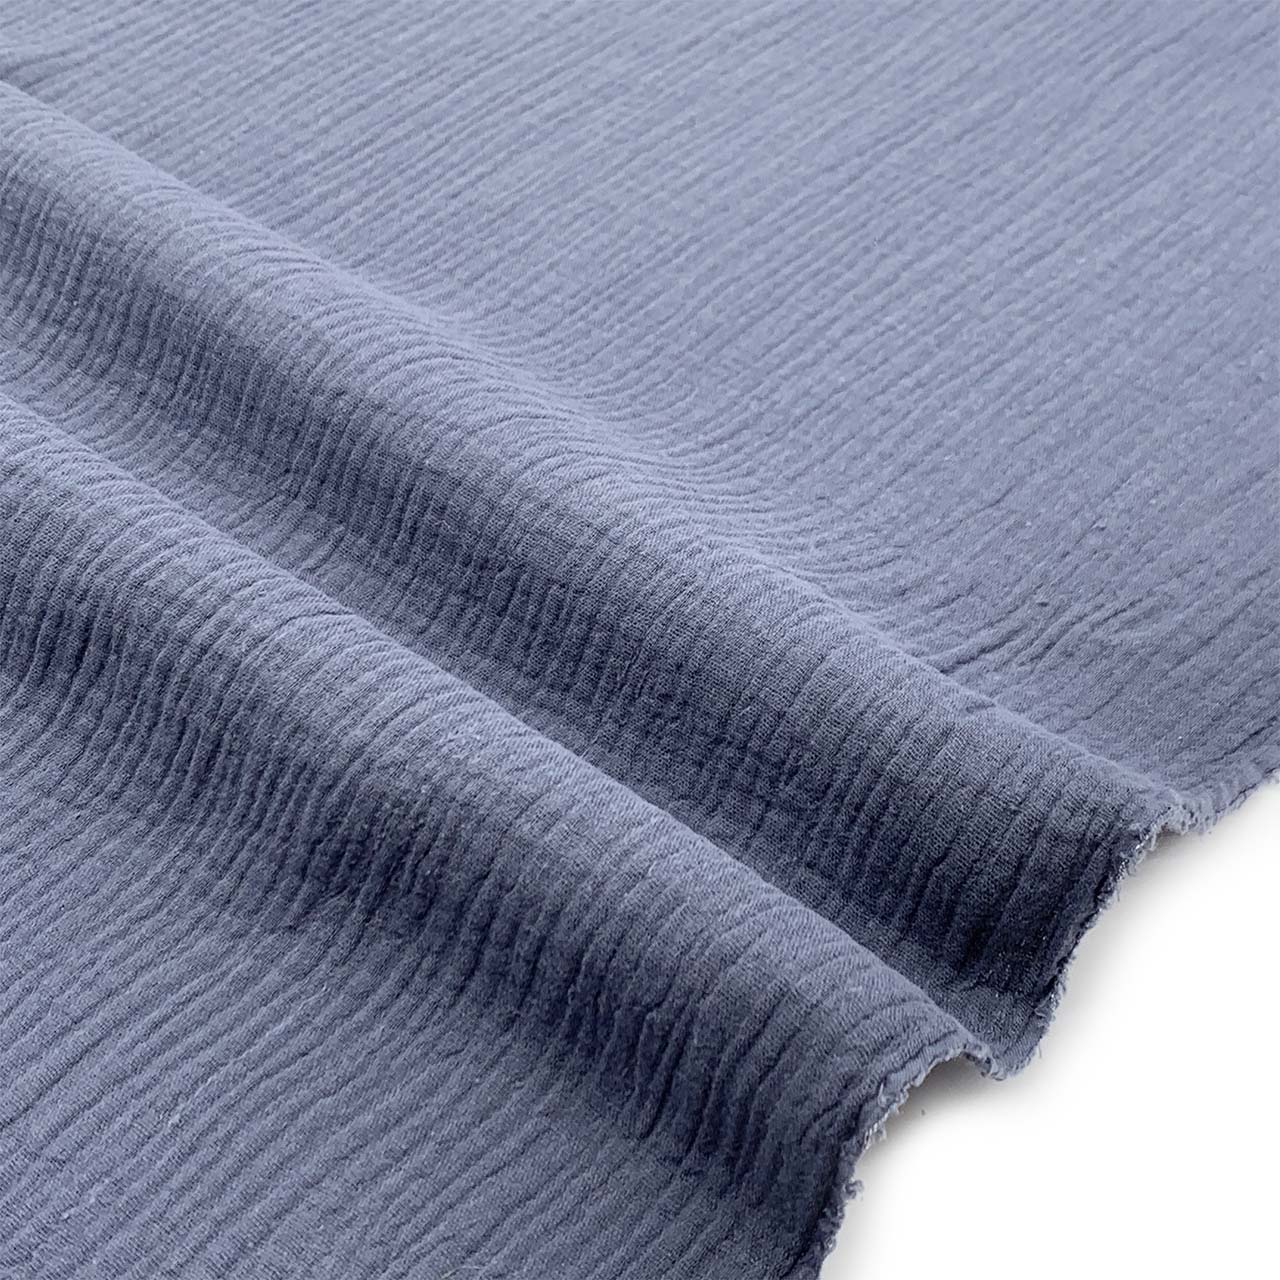 cotton fabric textured steel blue double cotton gauze fabric collection